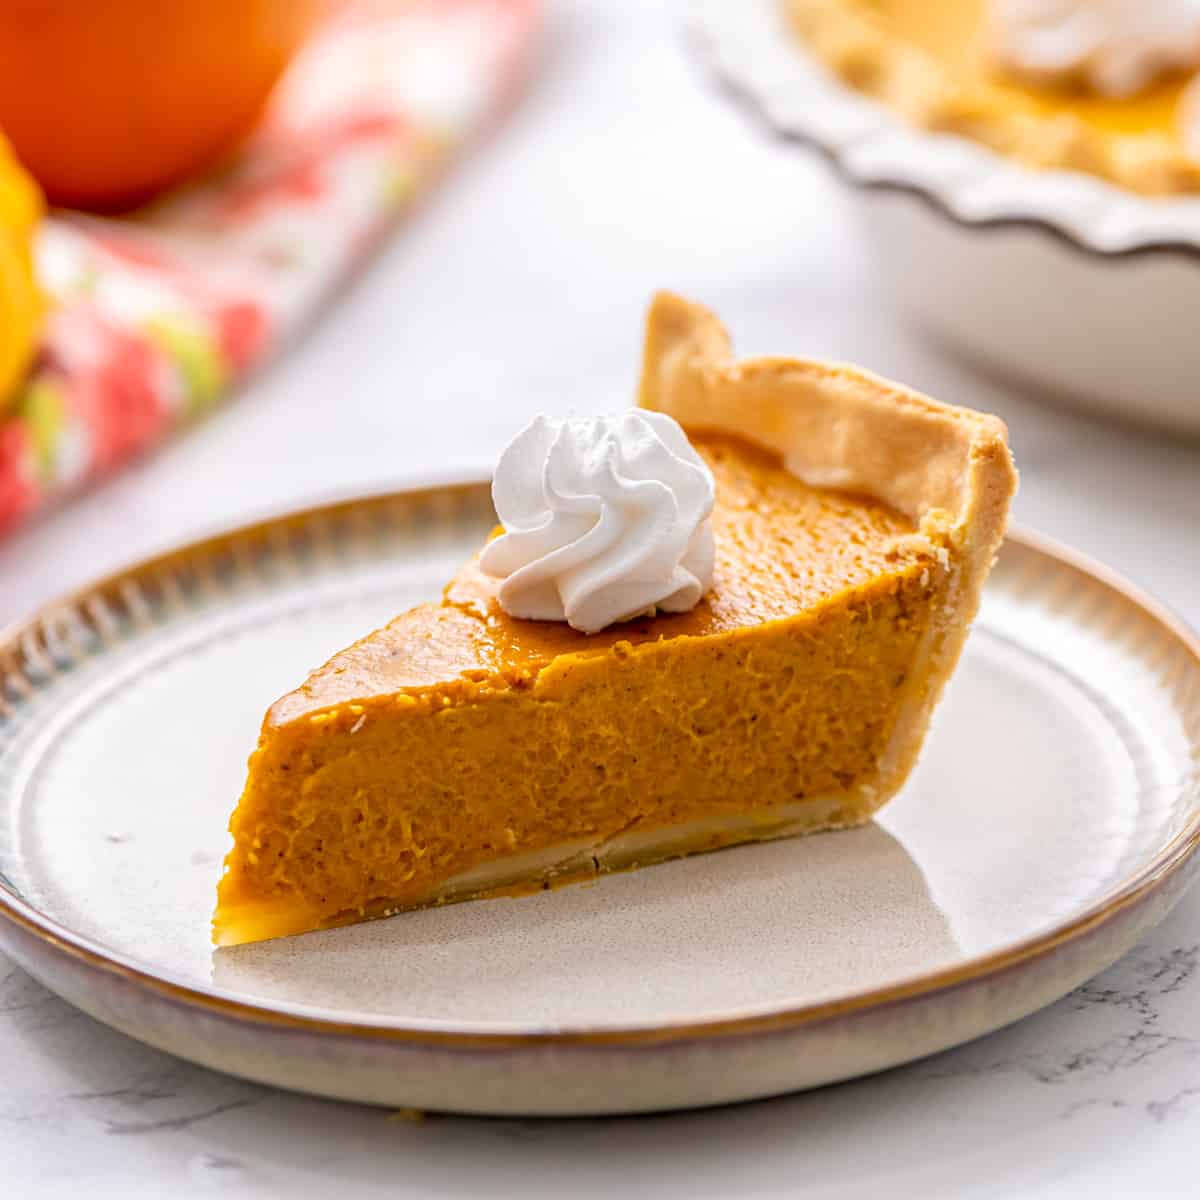 Slice of pumpkin pie on plate toped with whipped cream.